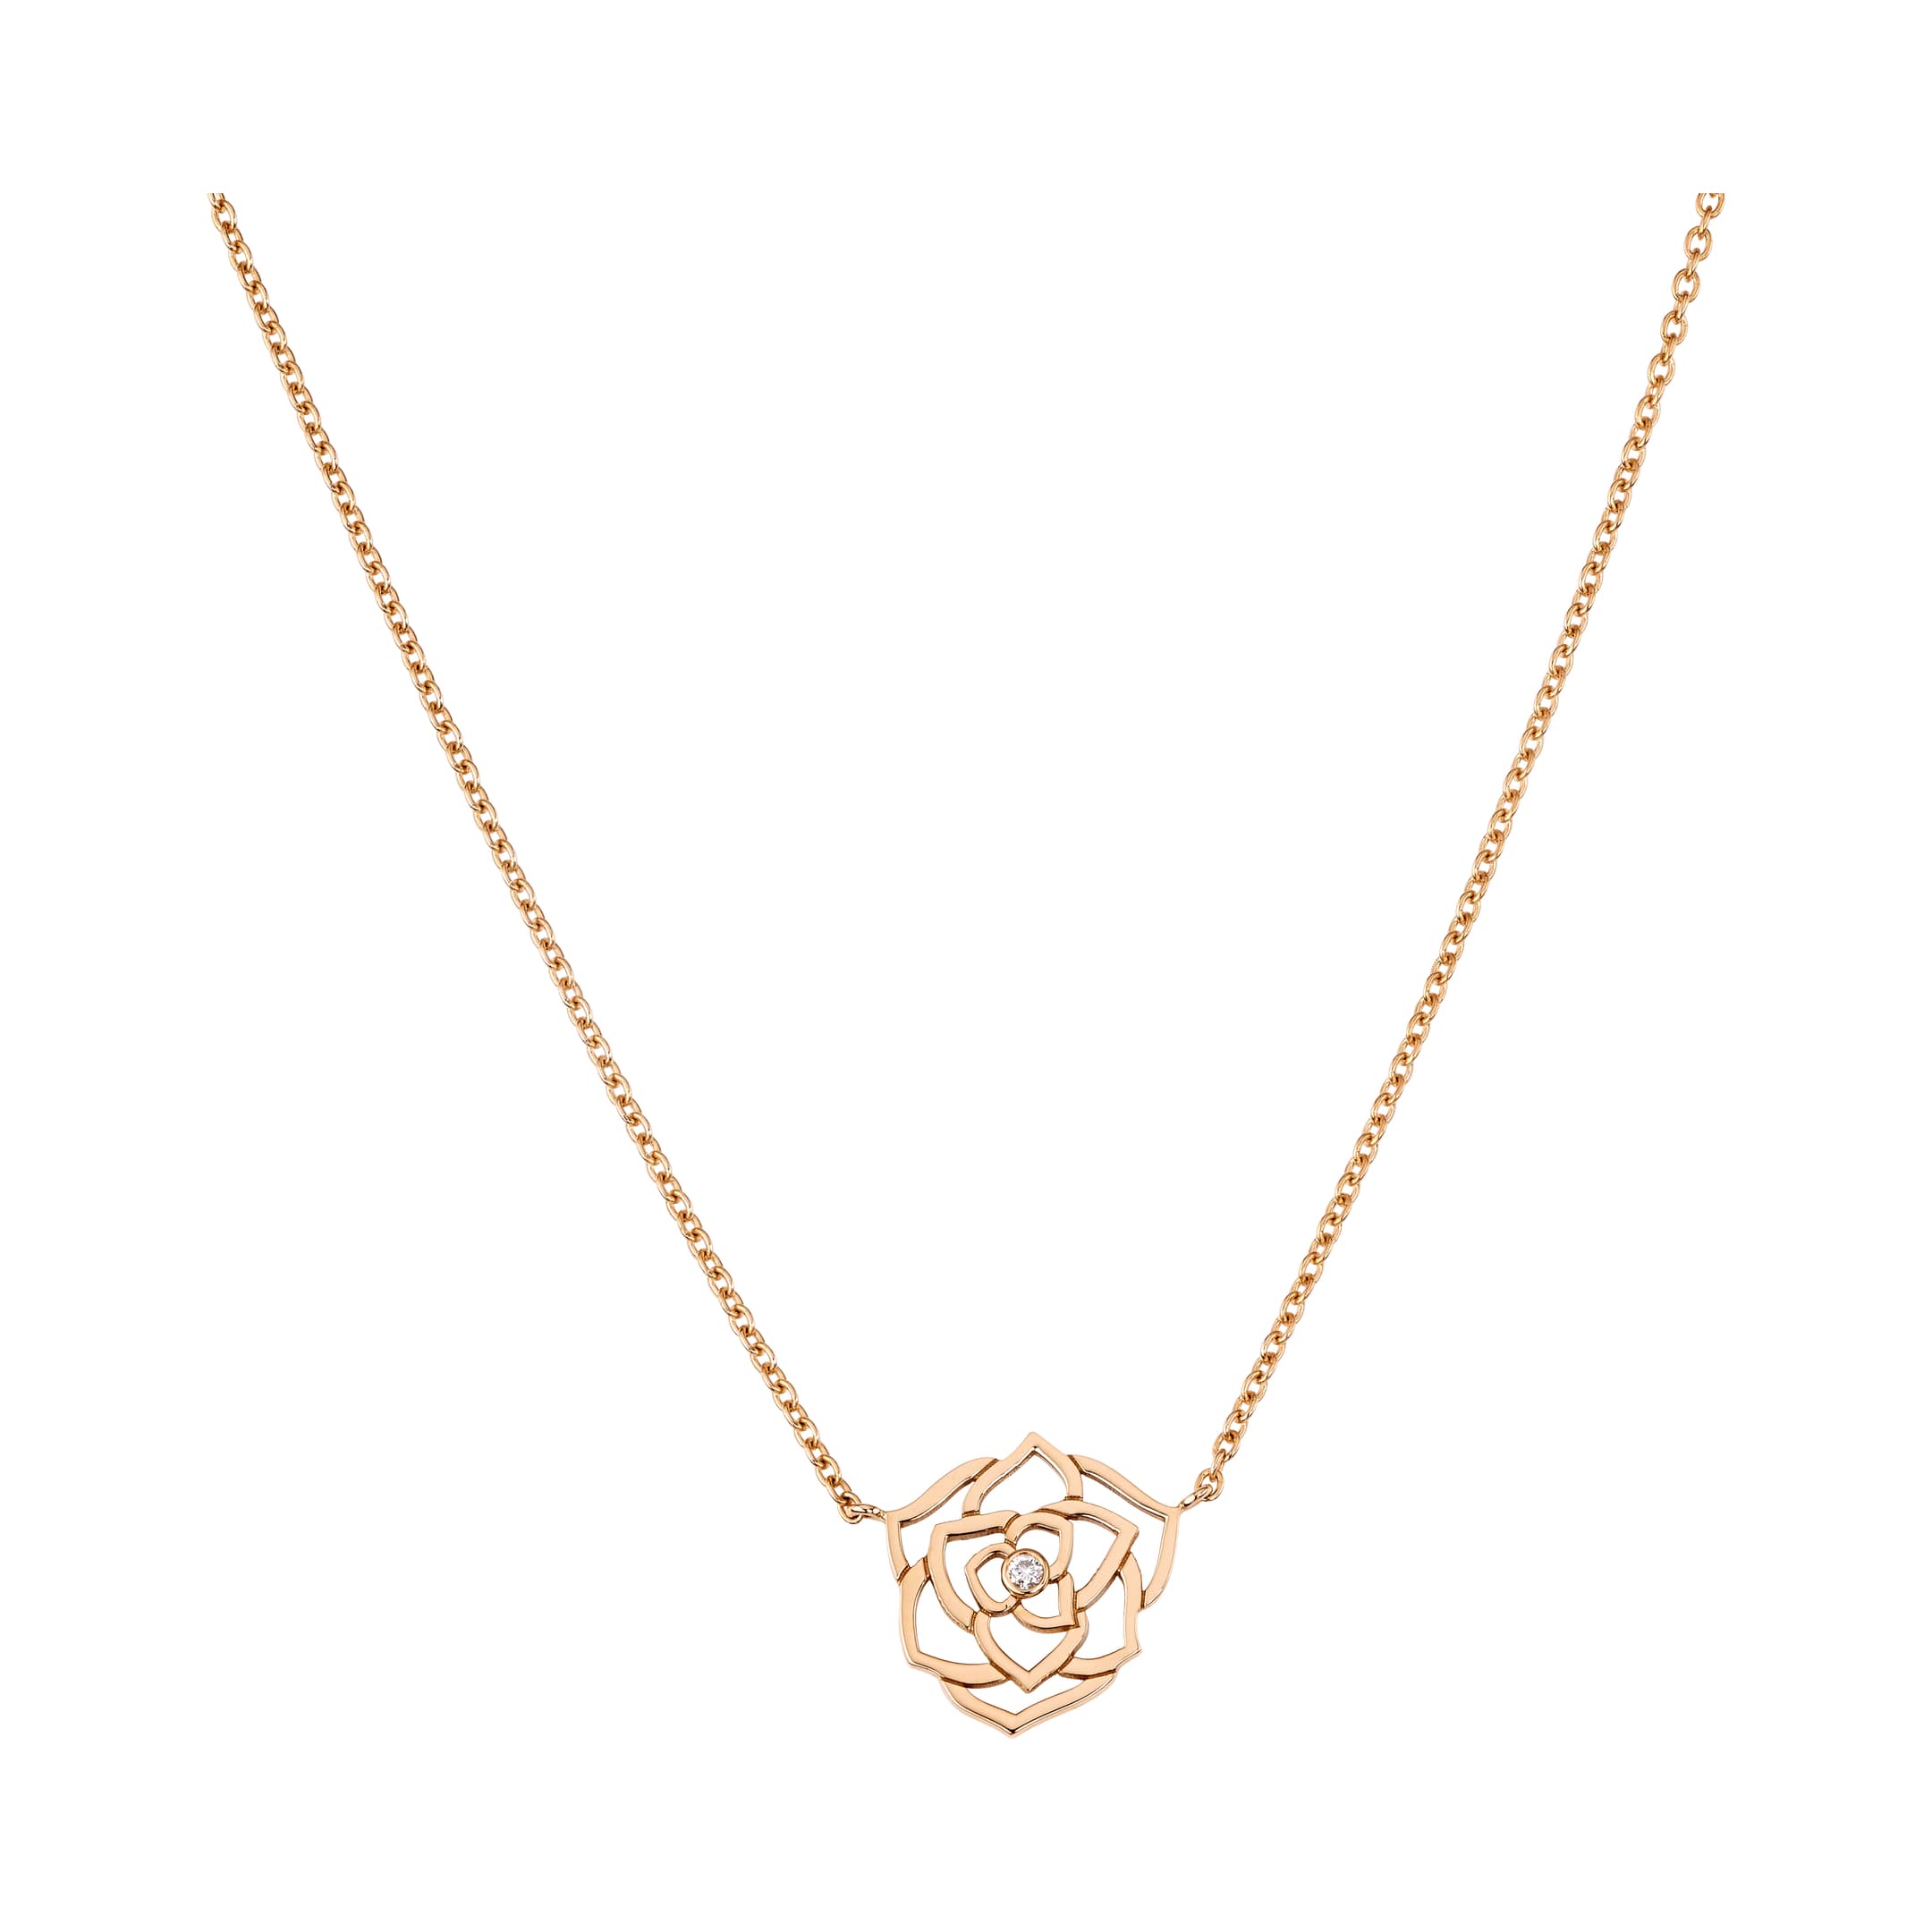 Eclosion Necklace - Rose Absolute - rose gold - 18 carat : Edenly jewellery